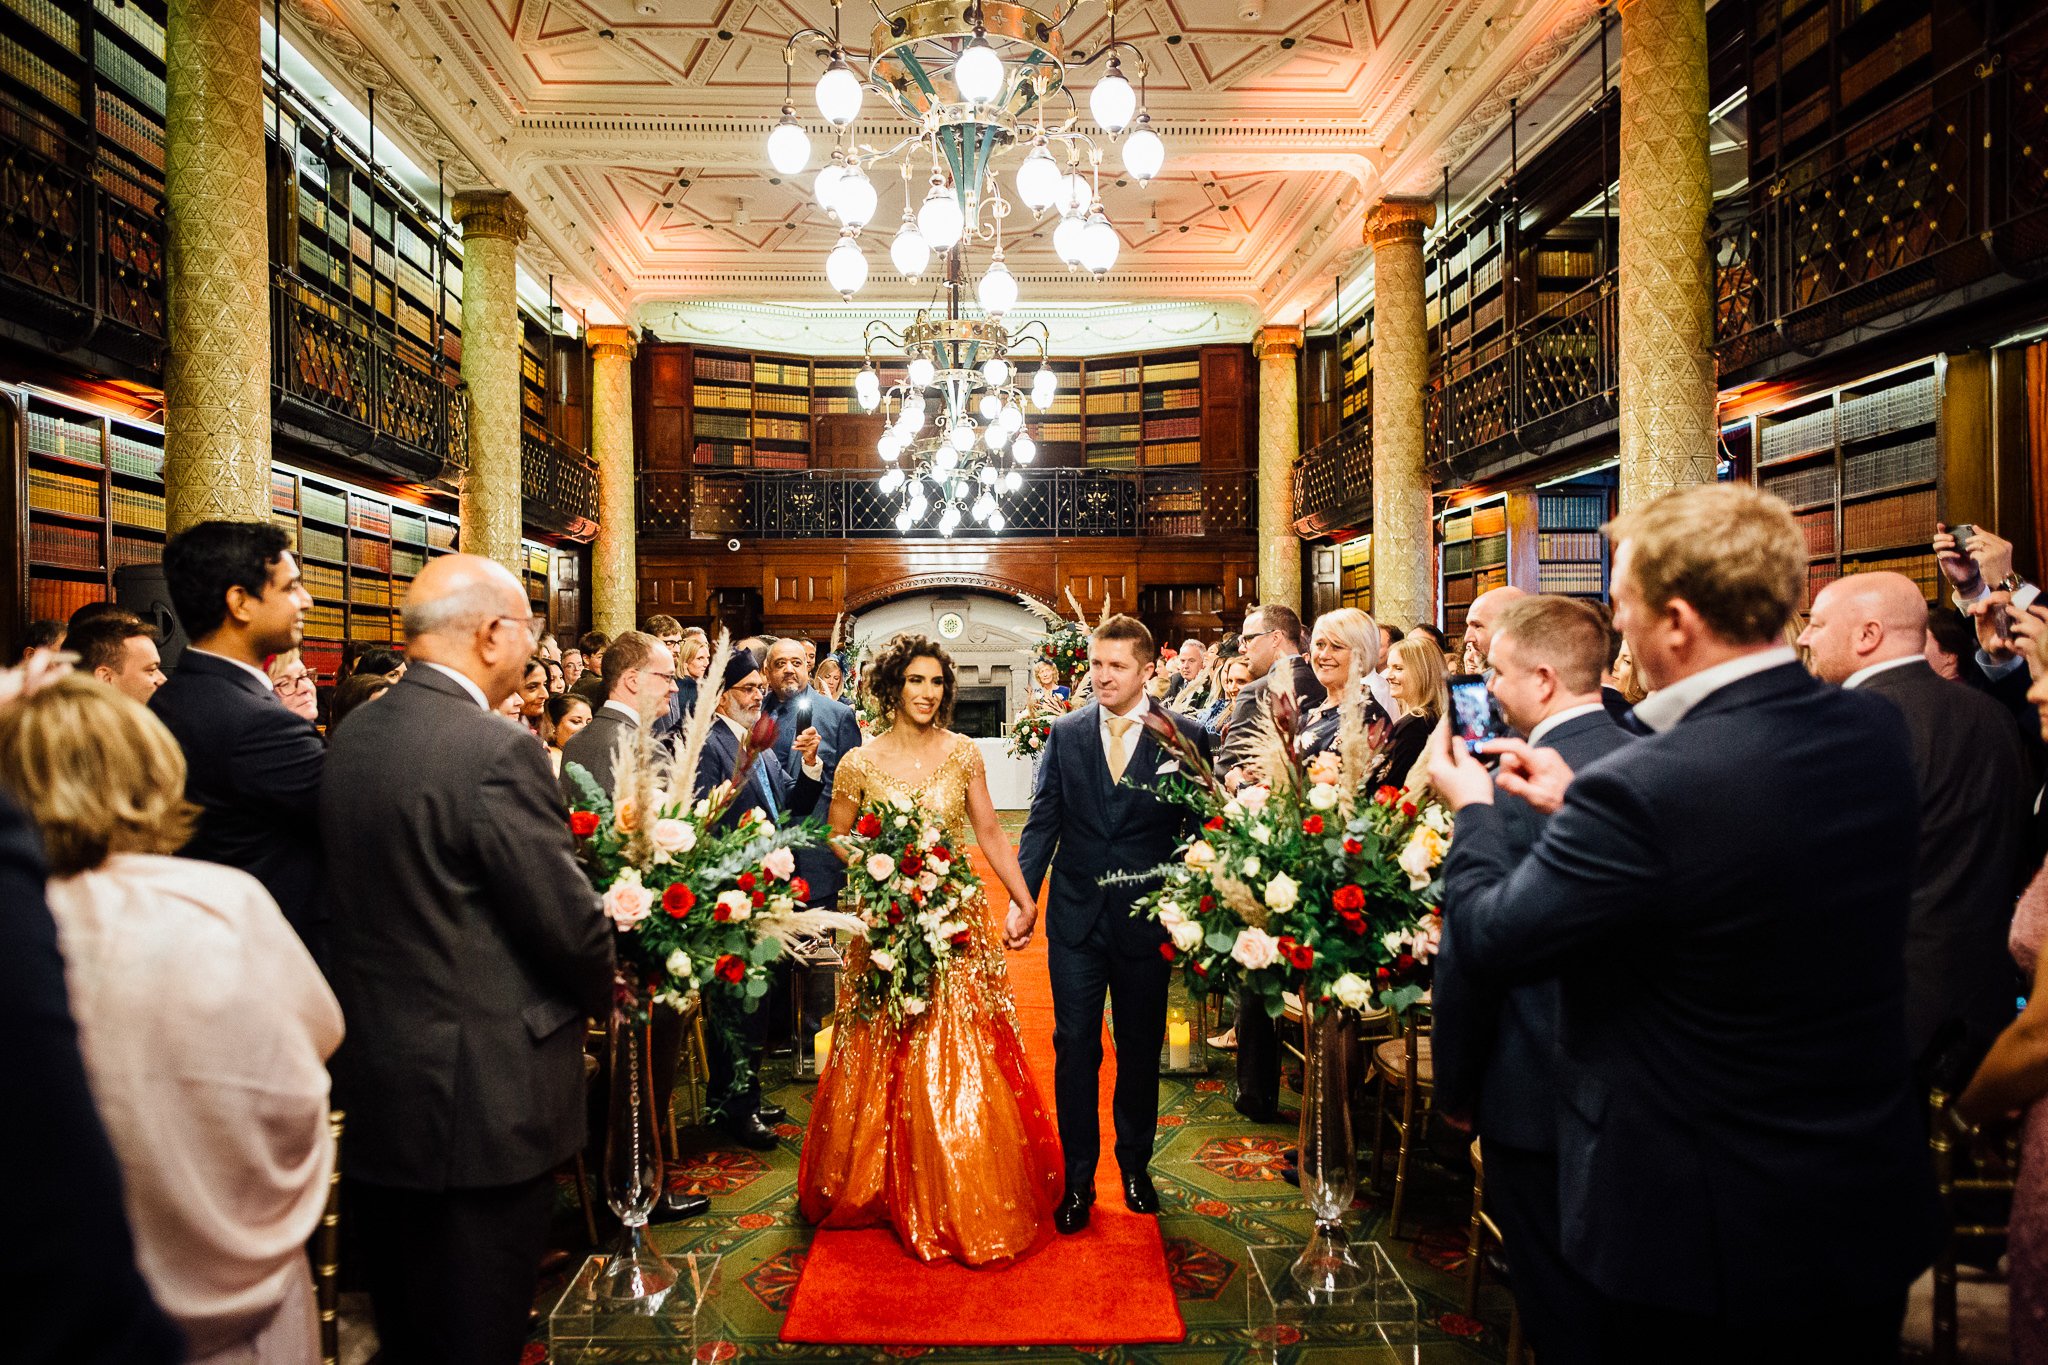  Bride and Groom walking down the aisle after being married at One Whitehall Place London 